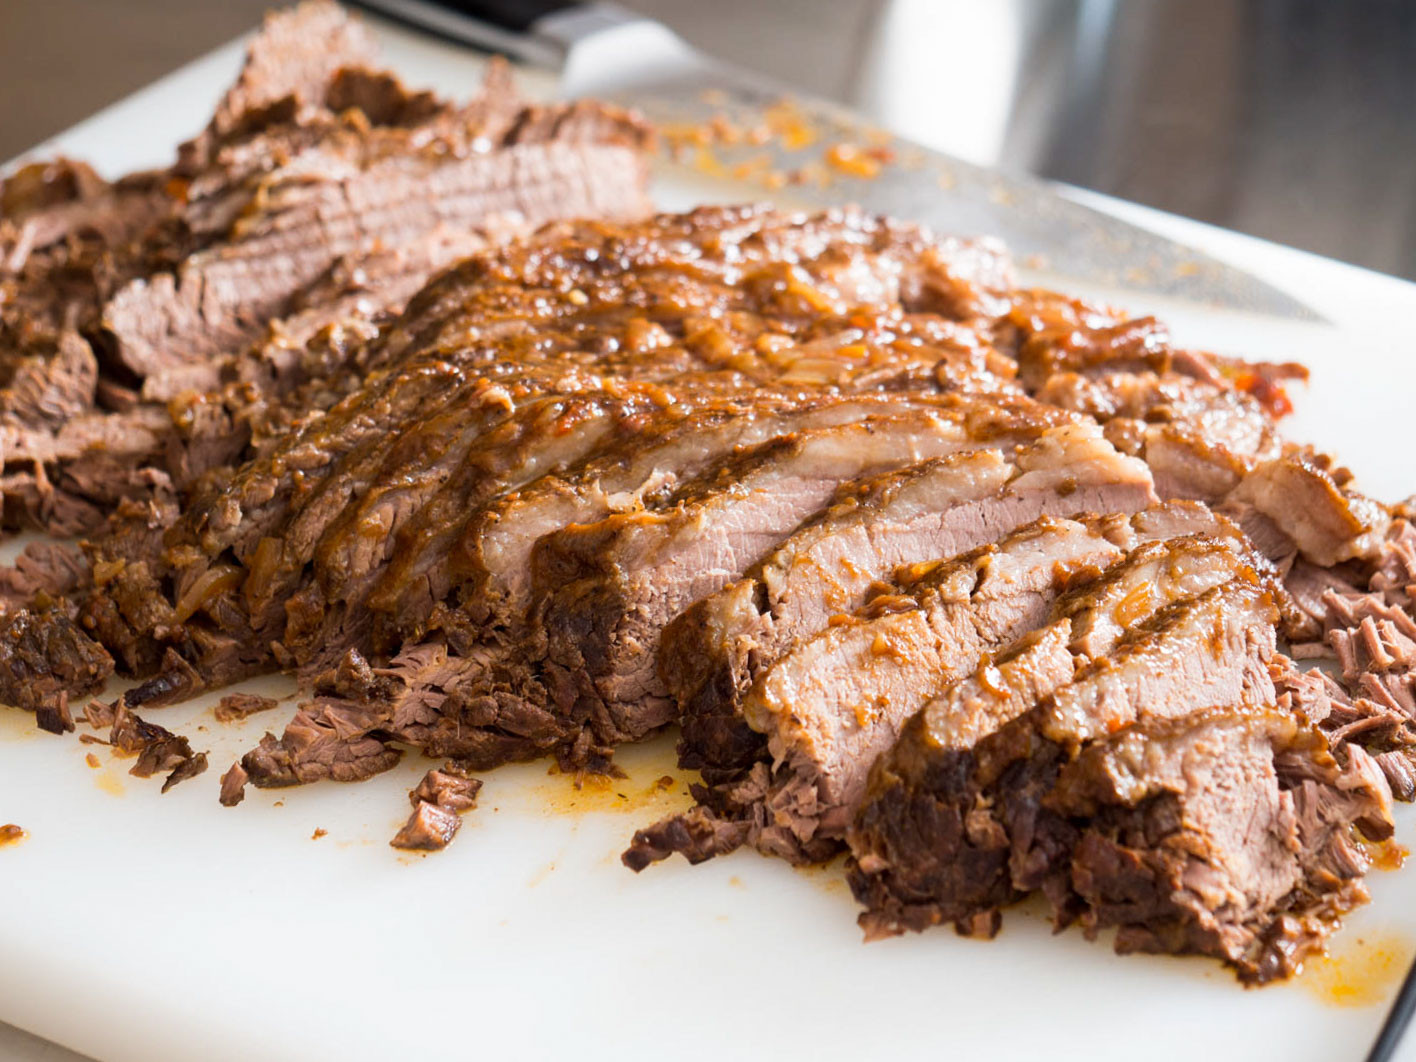 Best Passover Brisket Recipe
 How to Make Brisket for Passover That s Both Moist and